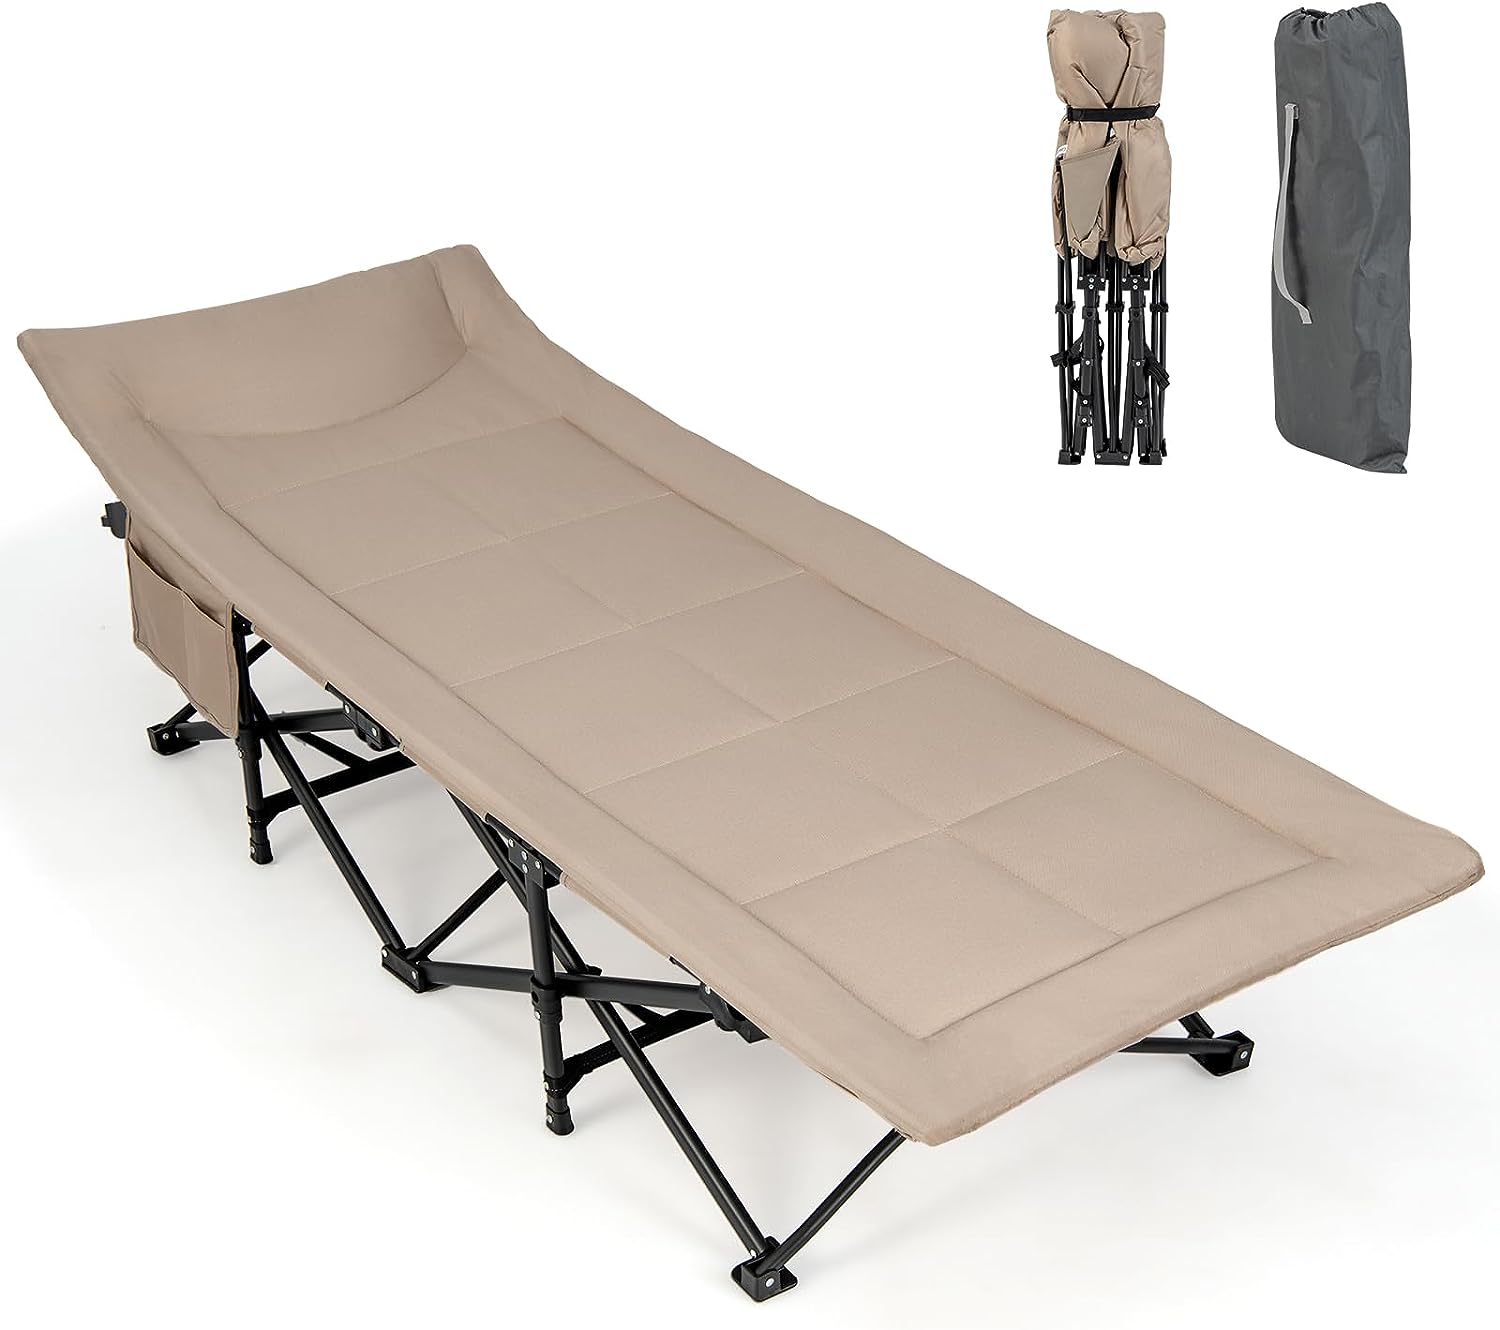 Giantex Folding Camping Cot for Adults - Sleeping Cot Bed with Carry Bag, Cushion & Headrest, 10 Foots